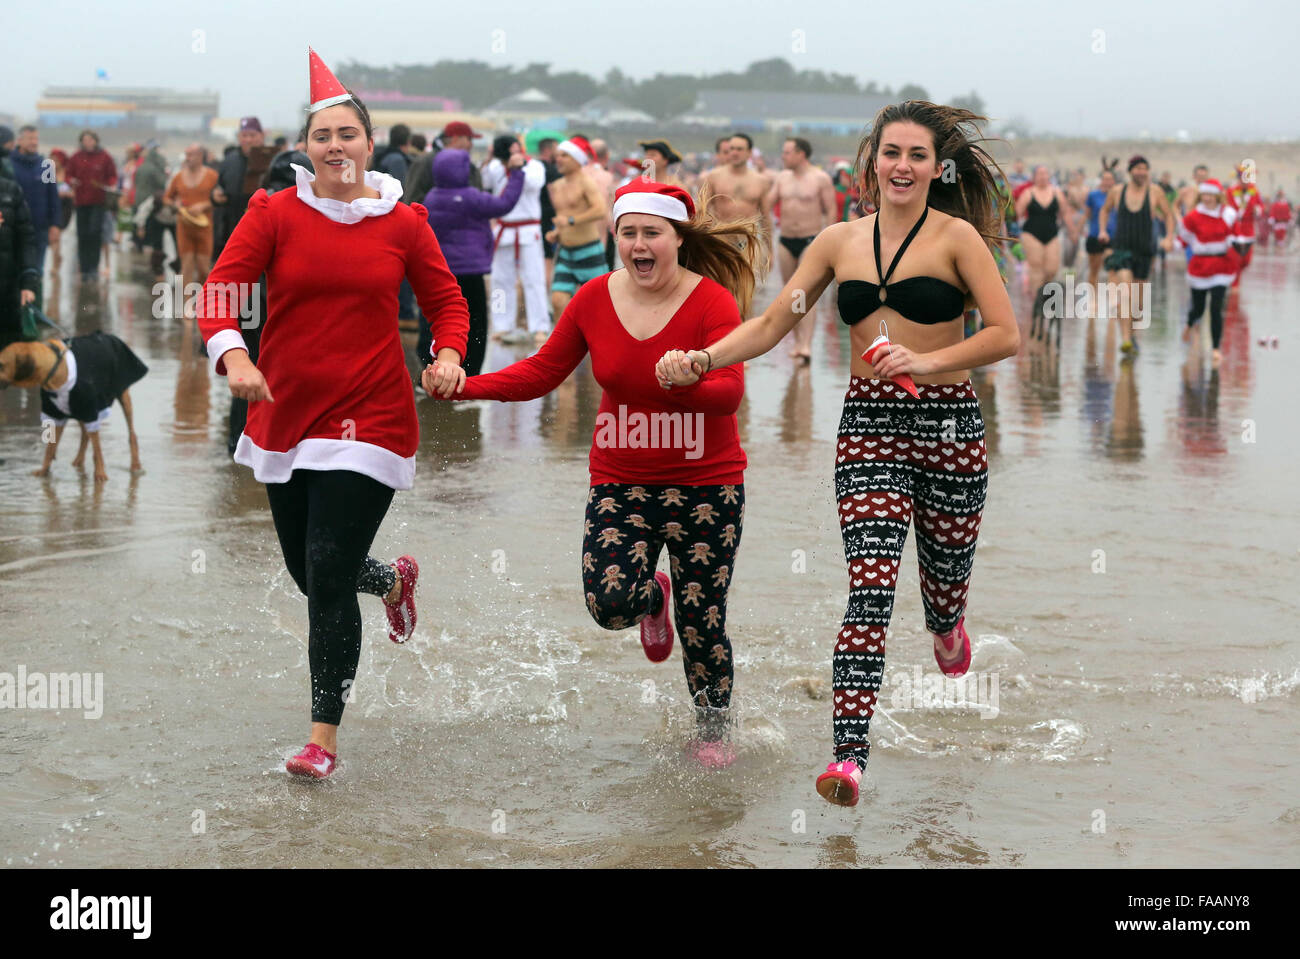 Porthcawl, UK. Friday 25 December 2015 Christmas swimmers in fancy dress costumes run towards  the seaRe: Hundreds of people in fancy dress, have taken part in this year's Christmas Swim in Porthcawl, south Wales. Credit:  D Legakis/Alamy Live News Stock Photo